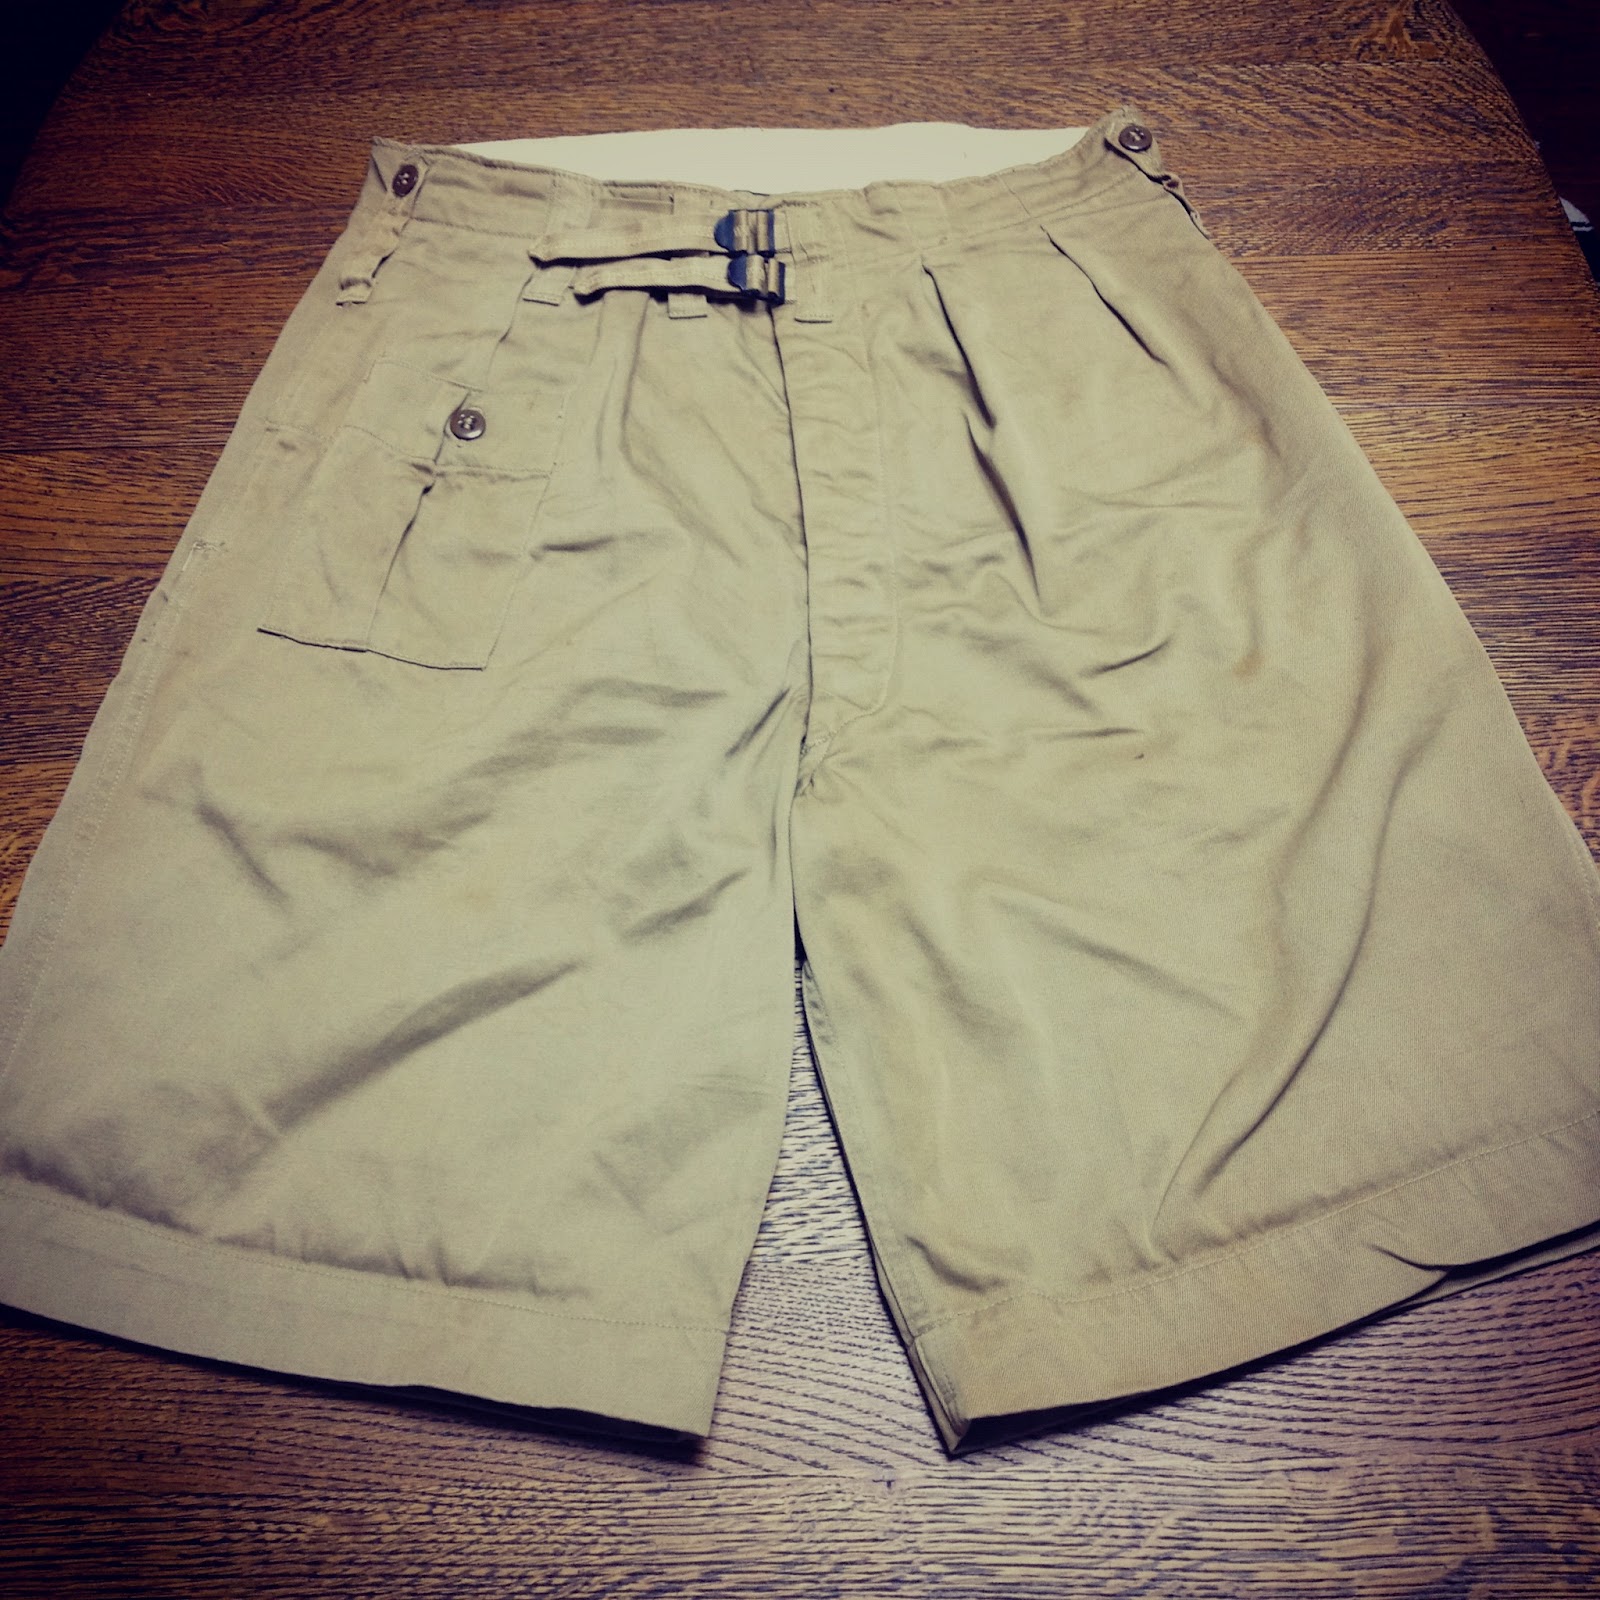 no room 501: 40's British Military Shorts deadstock→one wash